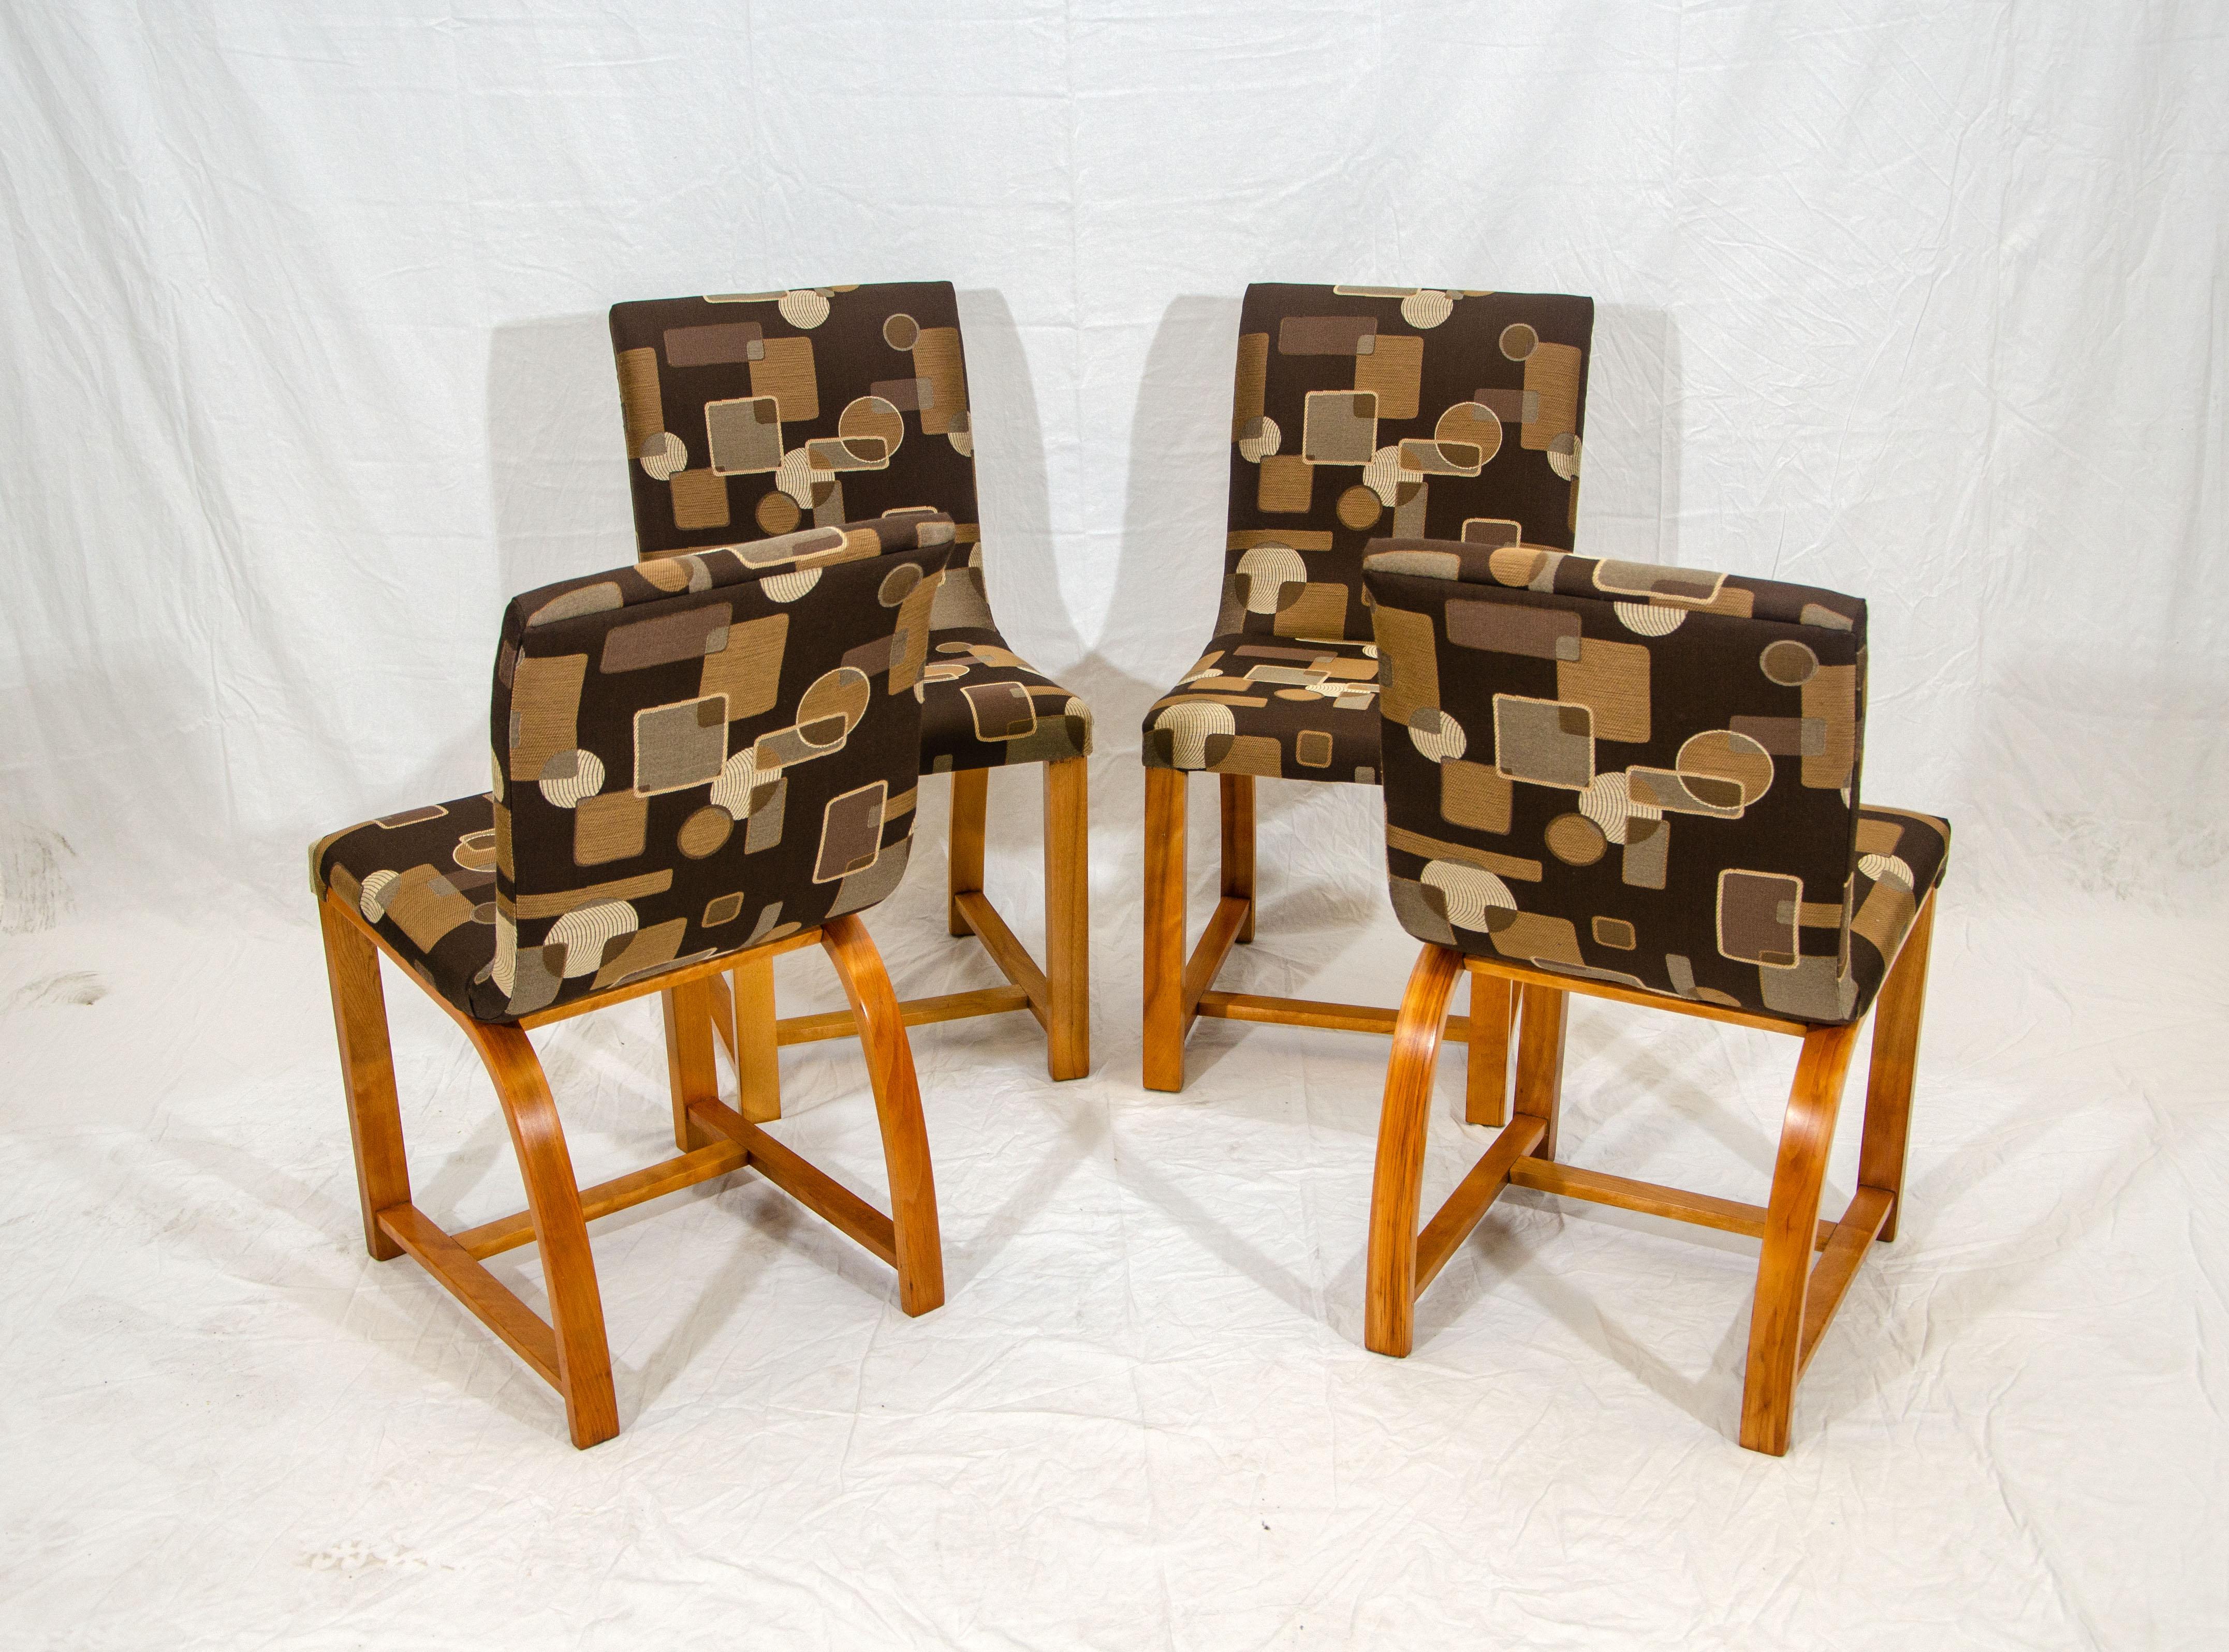 Set of four dining chairs designed by Gilbert Rohde for Heywood Wakefield and manufactured from 1936 through 1941. The new upholstery is pattern matched on all four chairs.